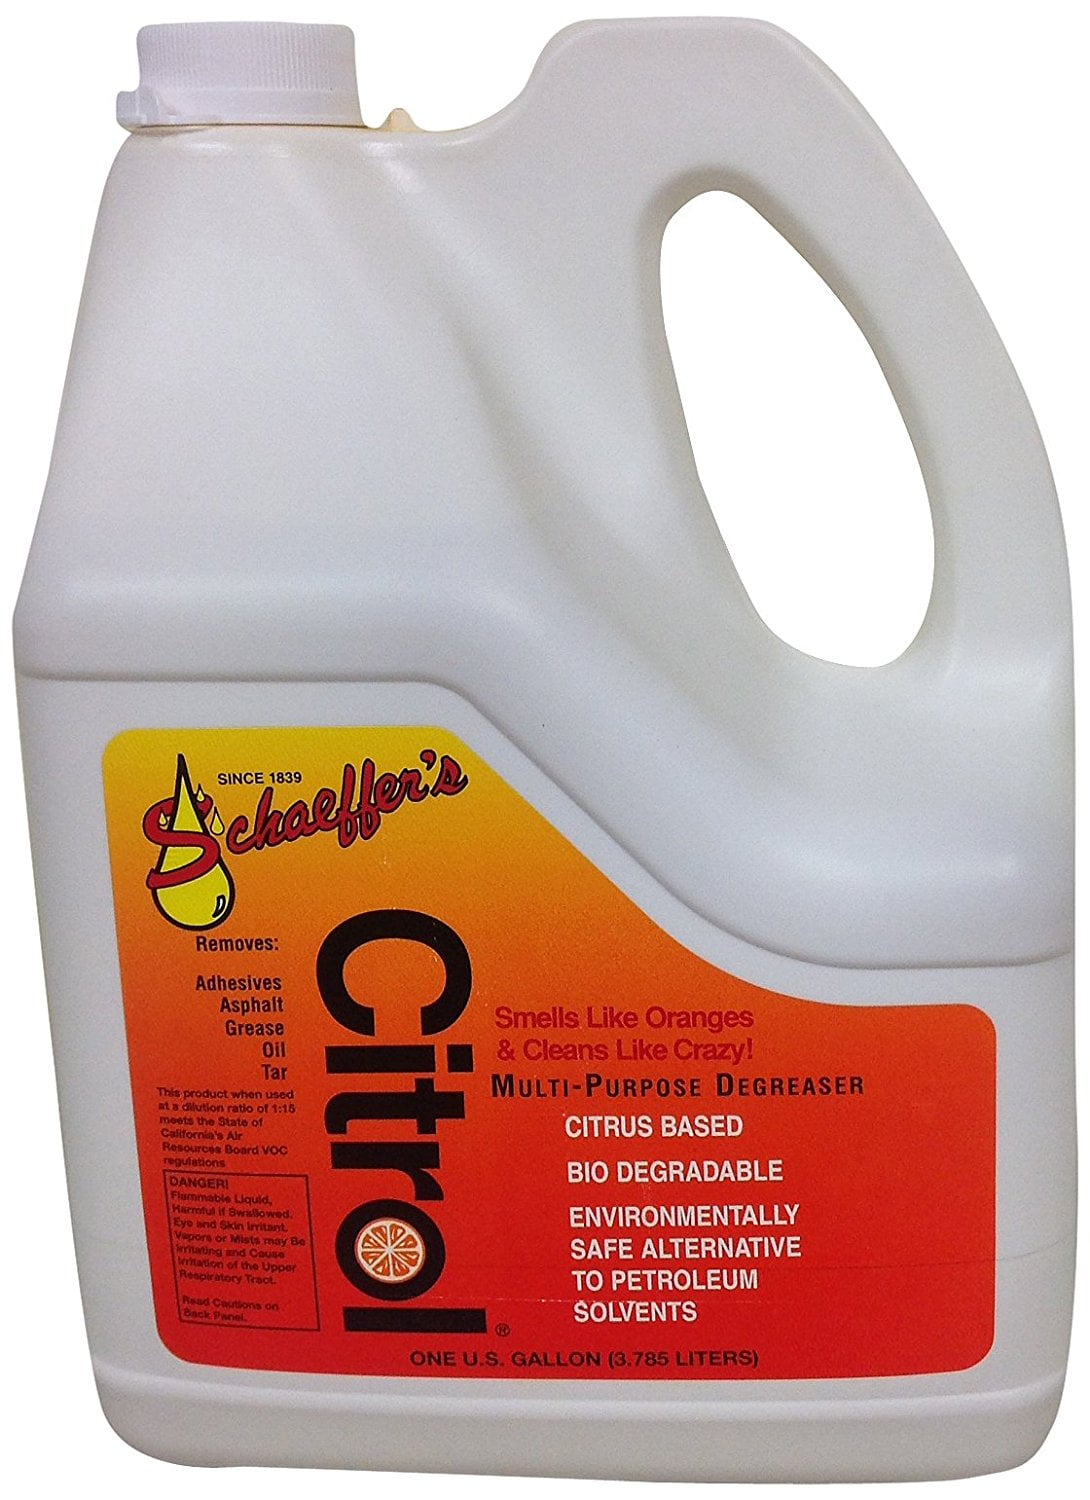 Arrow C834 Citrol Cleaner and Degreaser